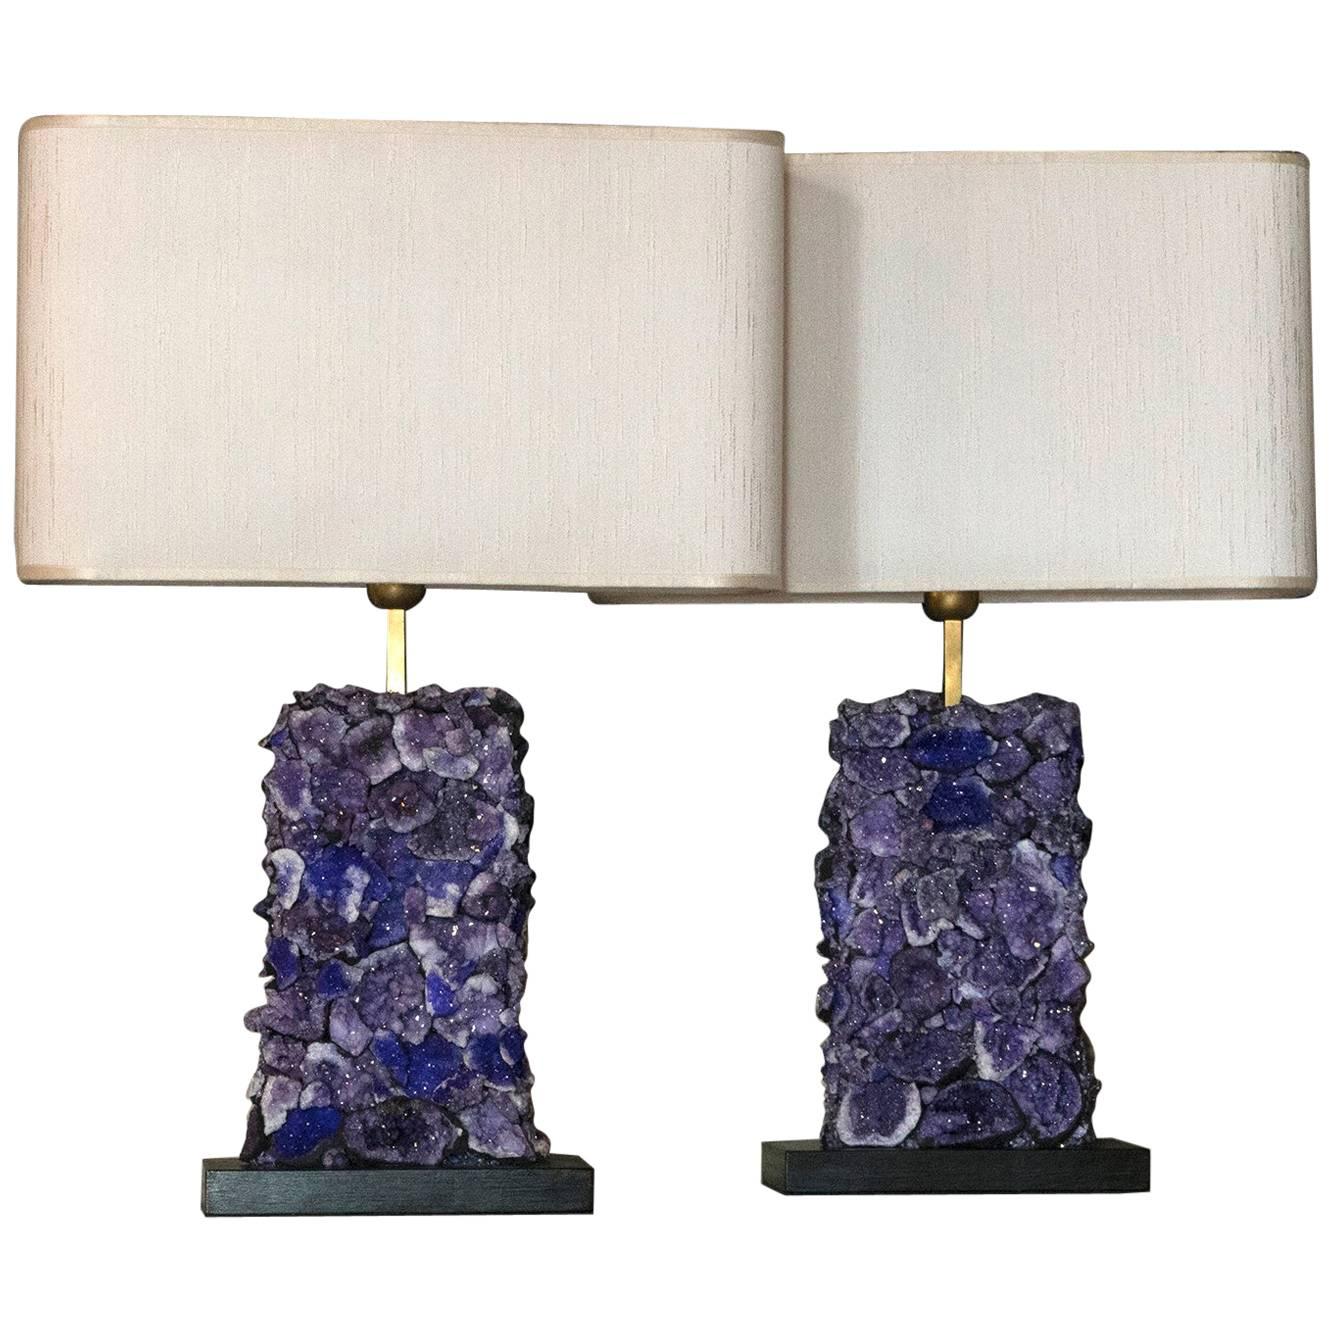 Flair Edition Amethyst Table Lamps, Italy 2017.